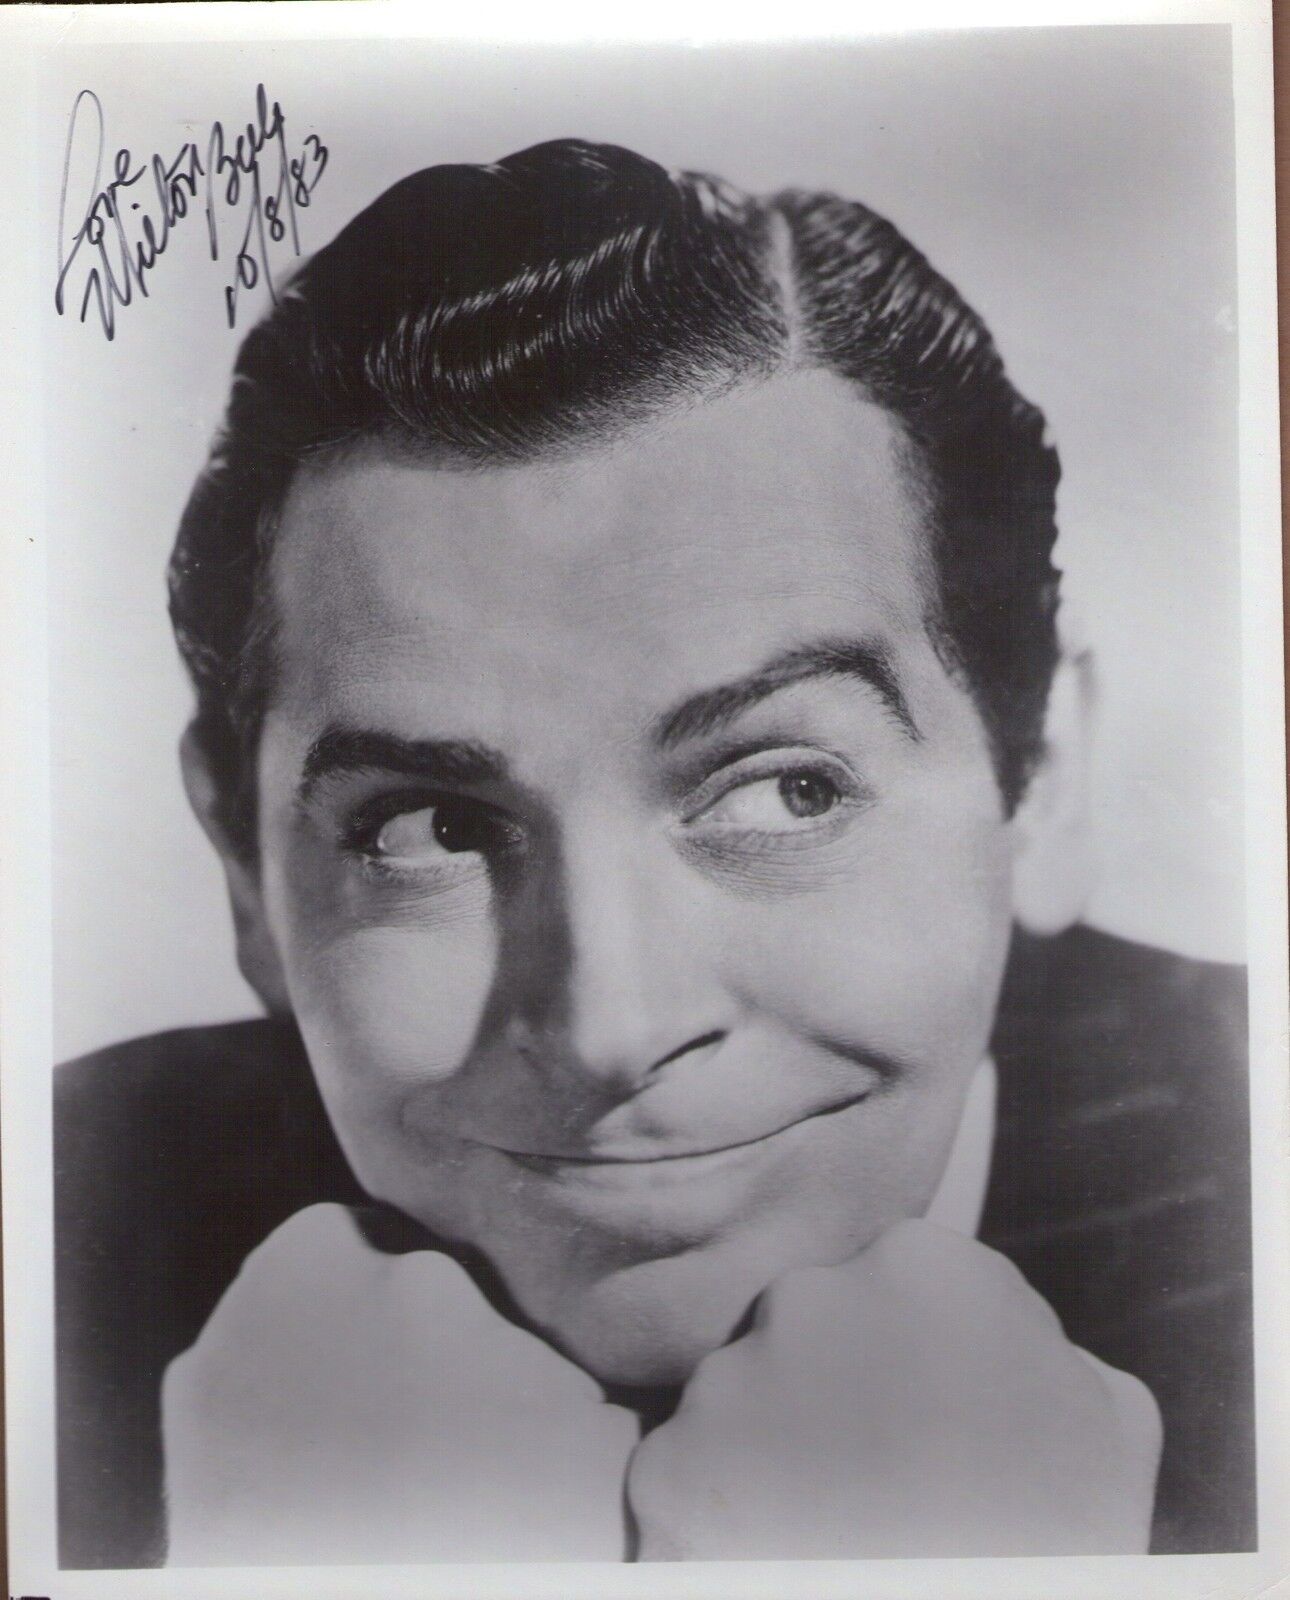 MILTON BERL, COMEDIAN, ACTOR EMMY WINNER SIGNED 8X10 Photo Poster painting DATED 1983